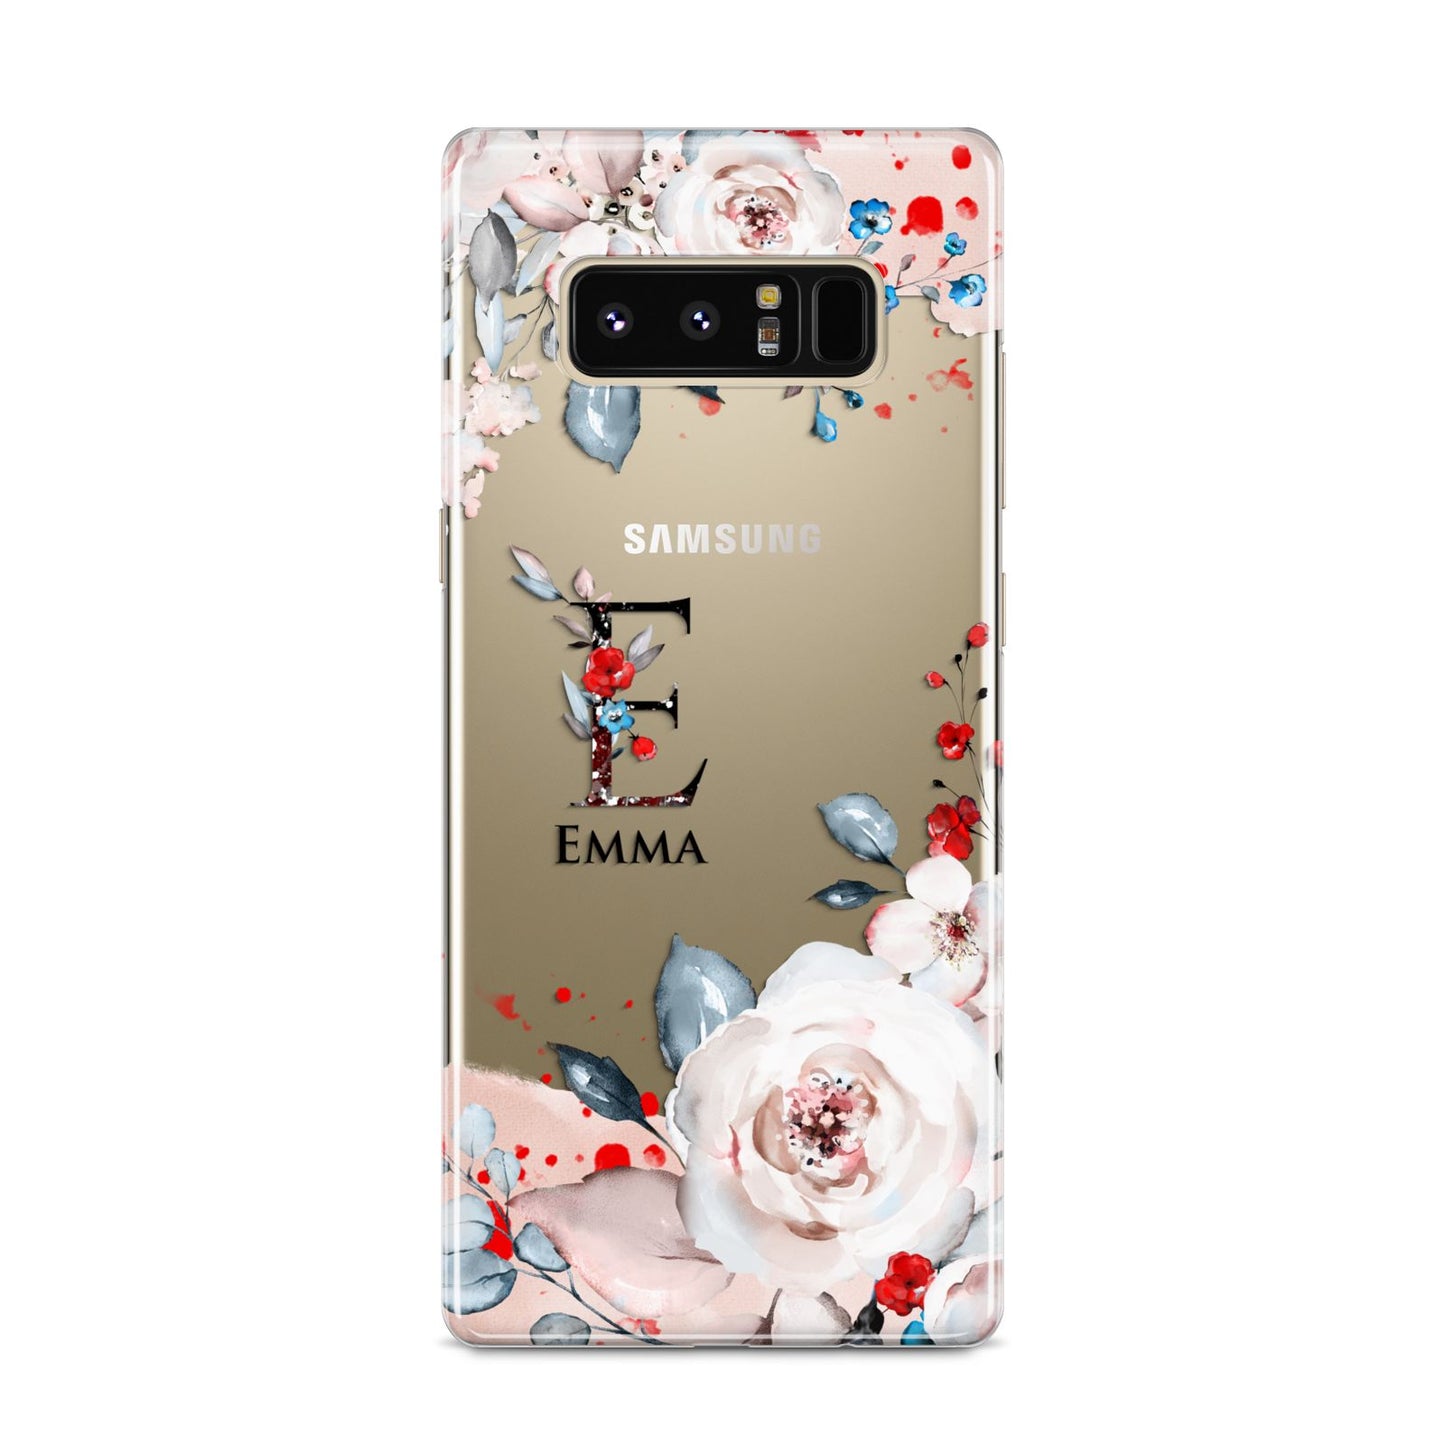 Monogrammed Roses Floral Wreath Samsung Galaxy S8 Case